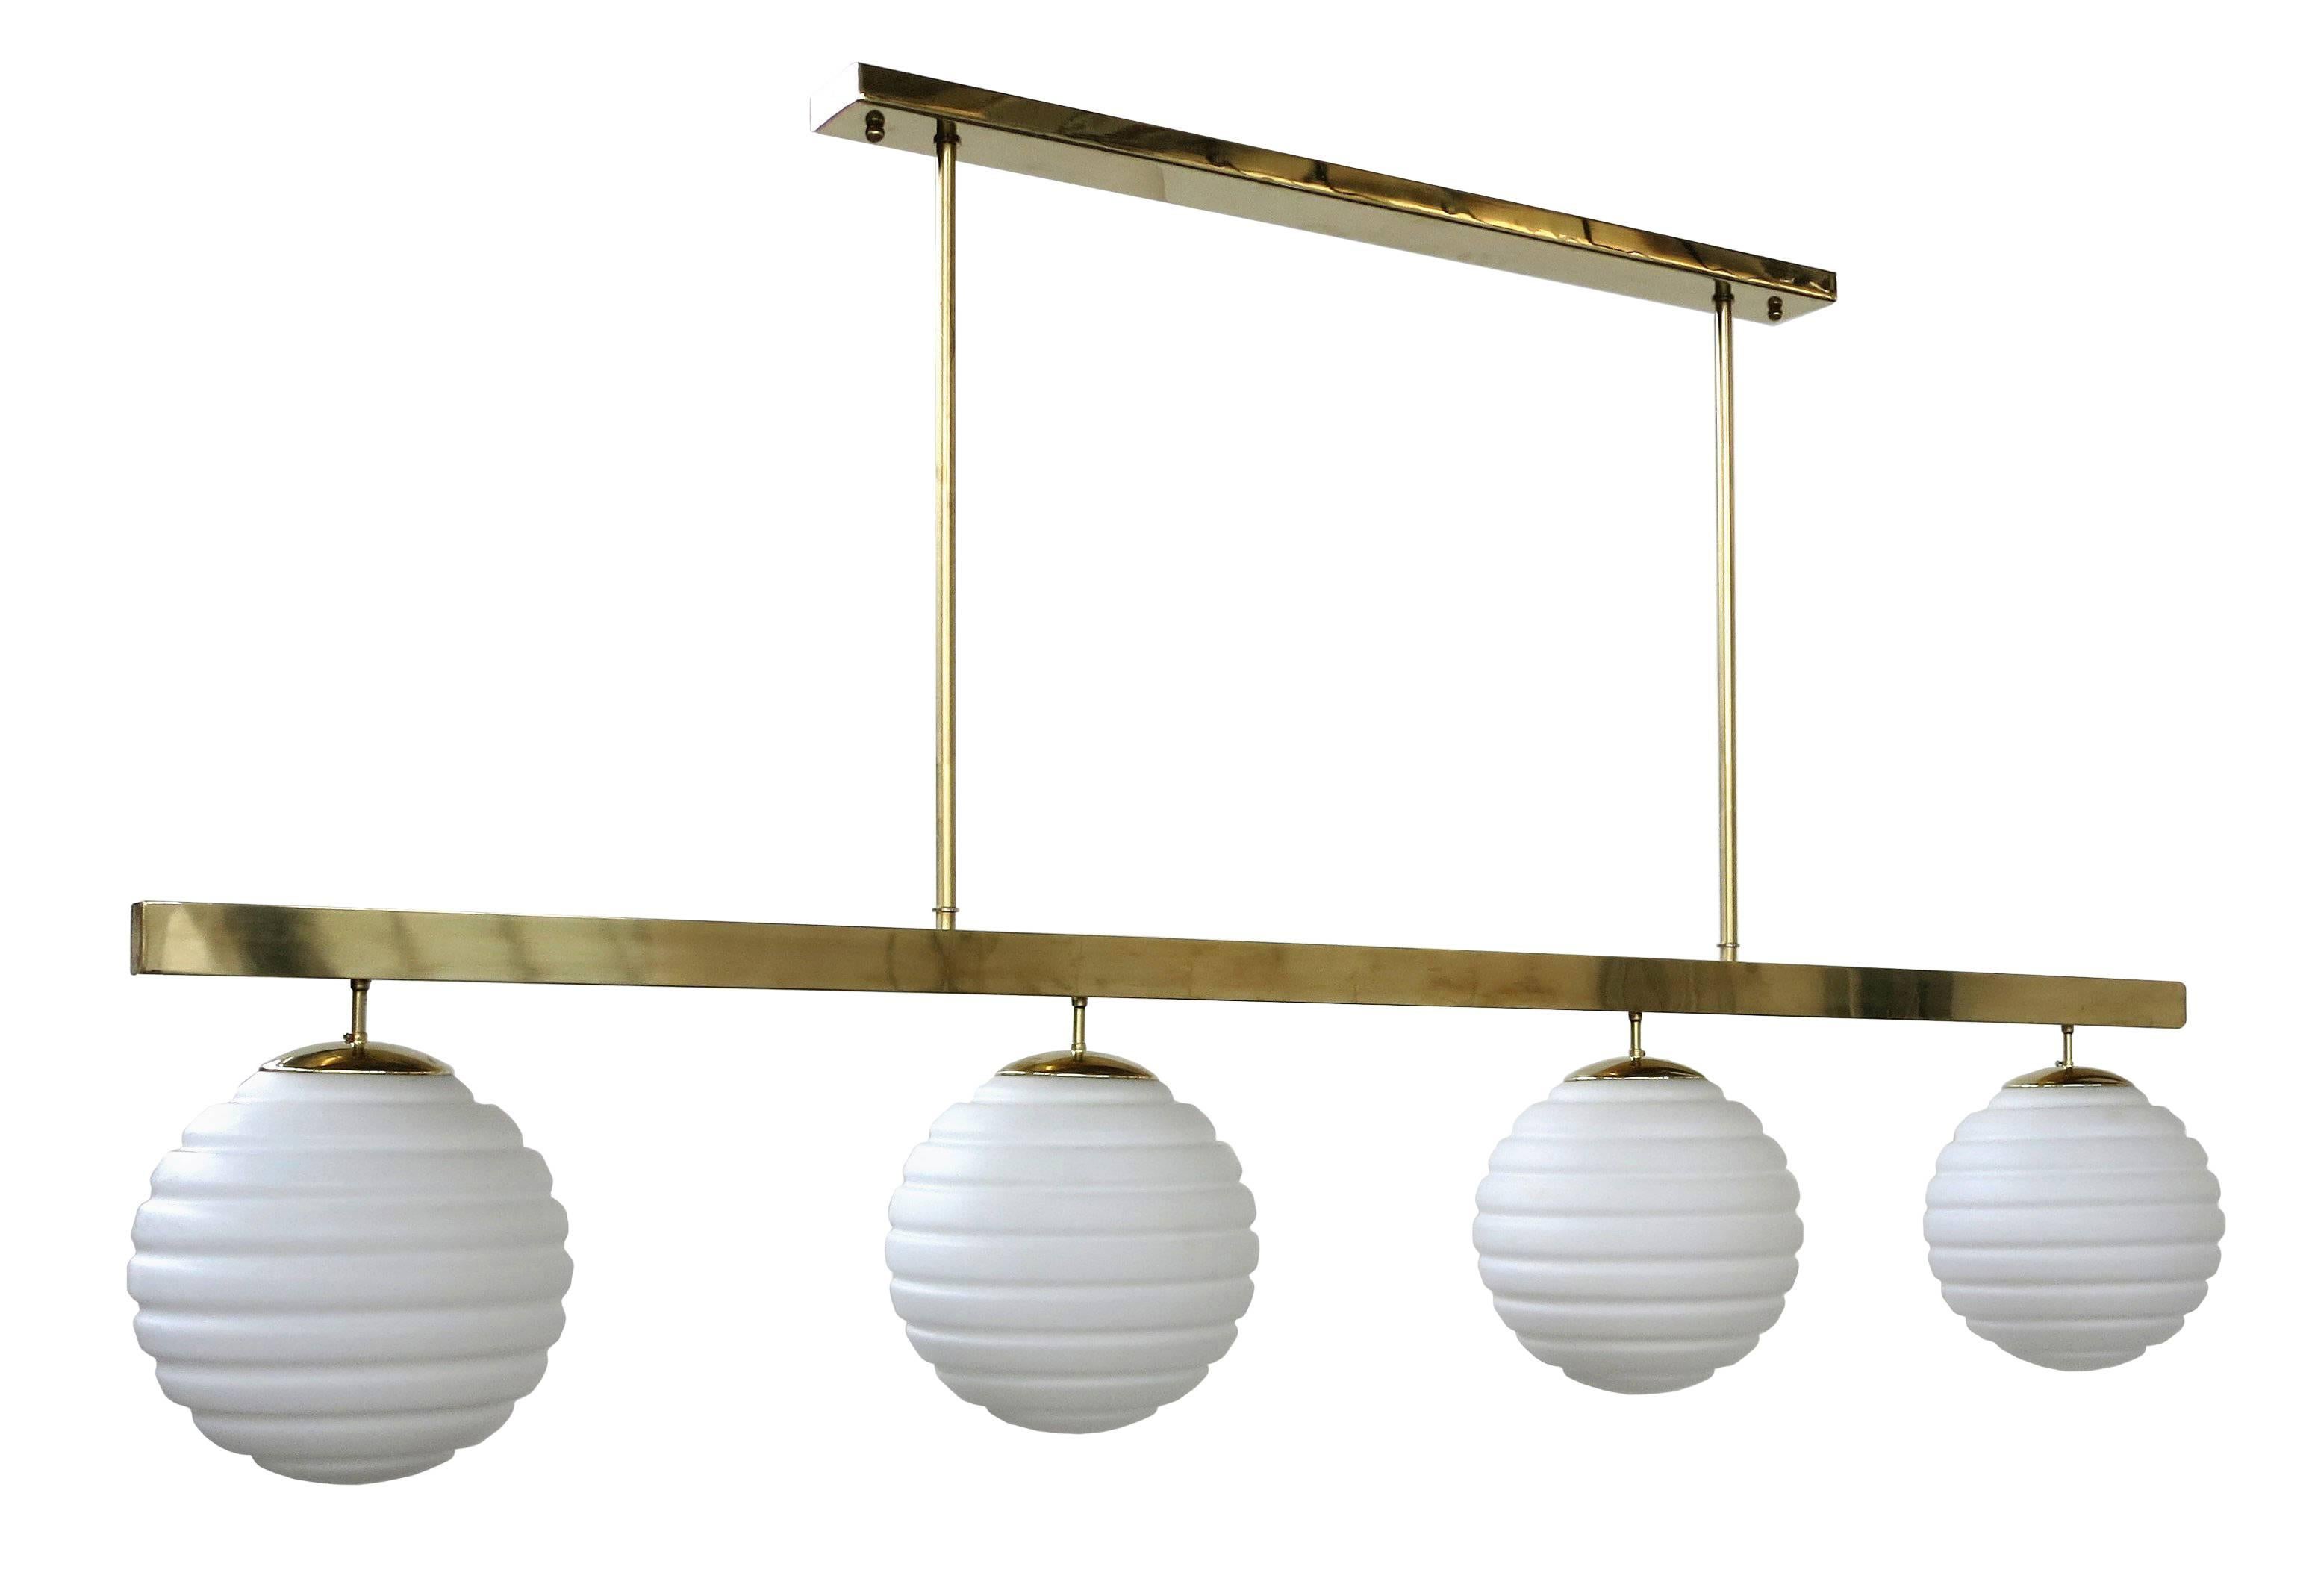 Italian pendant chandelier shown in white ribbed Murano glass globes, mounted on polished brass frame / Designed by Fabio Bergomi for Fabio Ltd / Made in Italy
4 lights / E26 or E27 type / max 40W each
Height: 41.5 inches including rods and canopy /